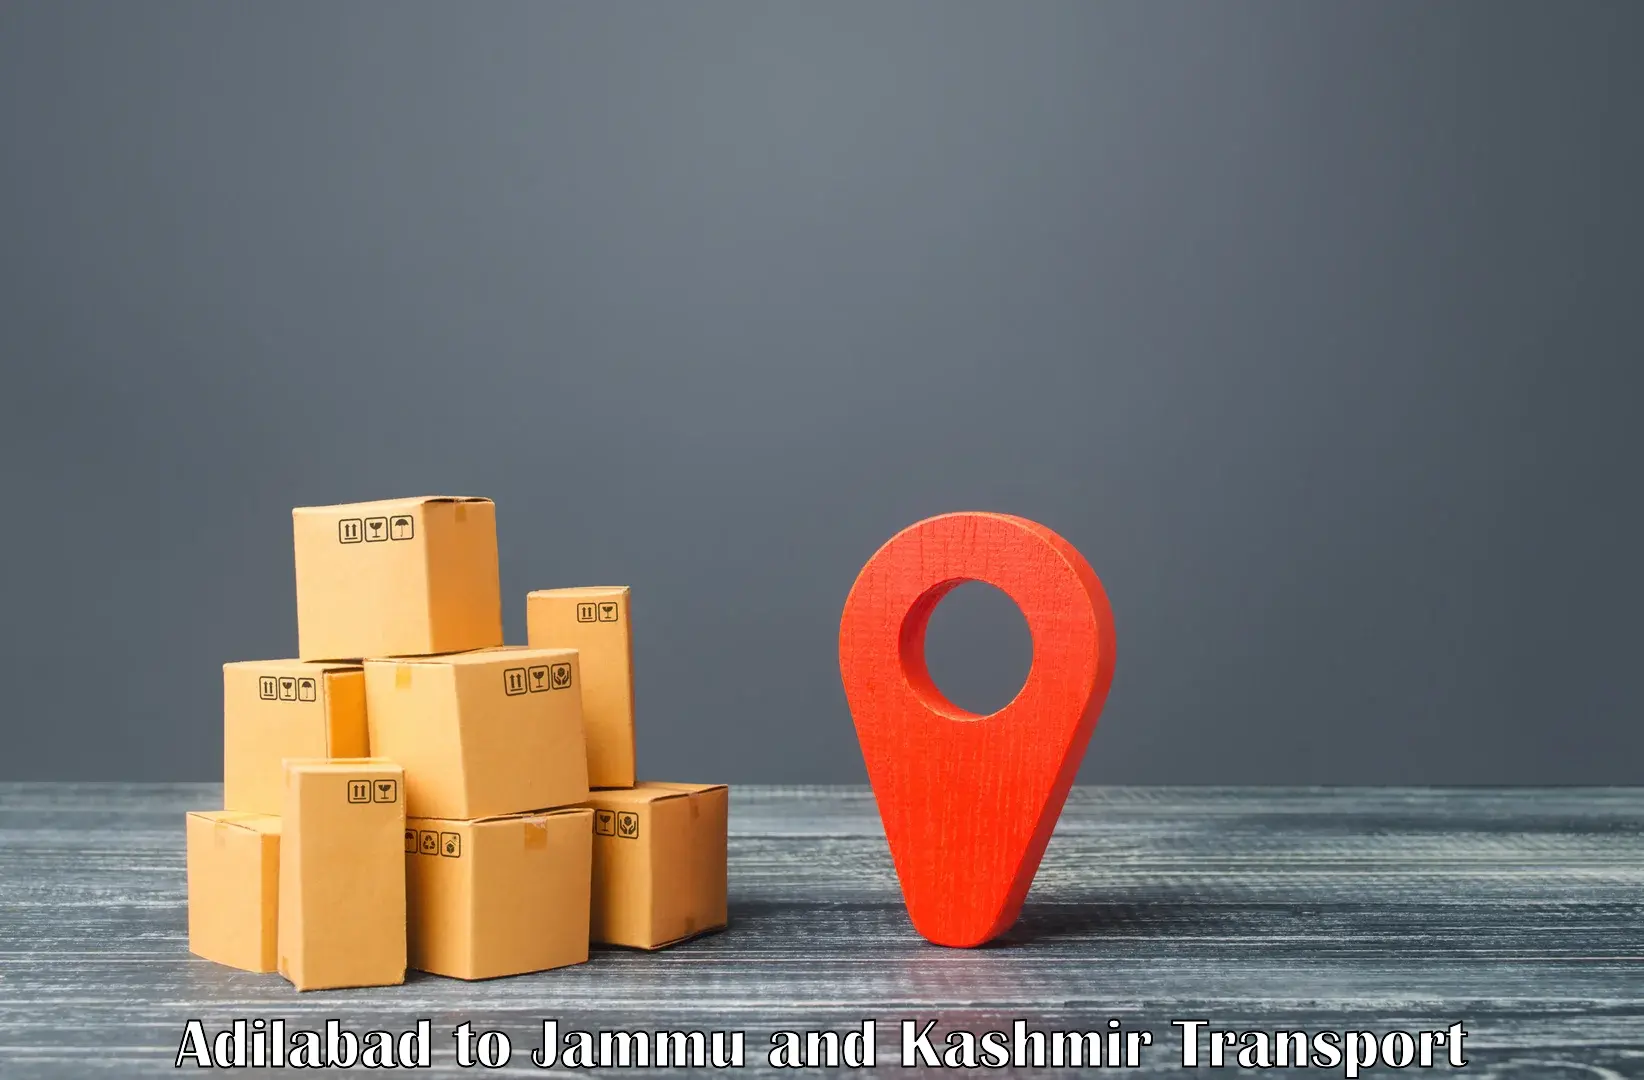 Delivery service Adilabad to Jammu and Kashmir